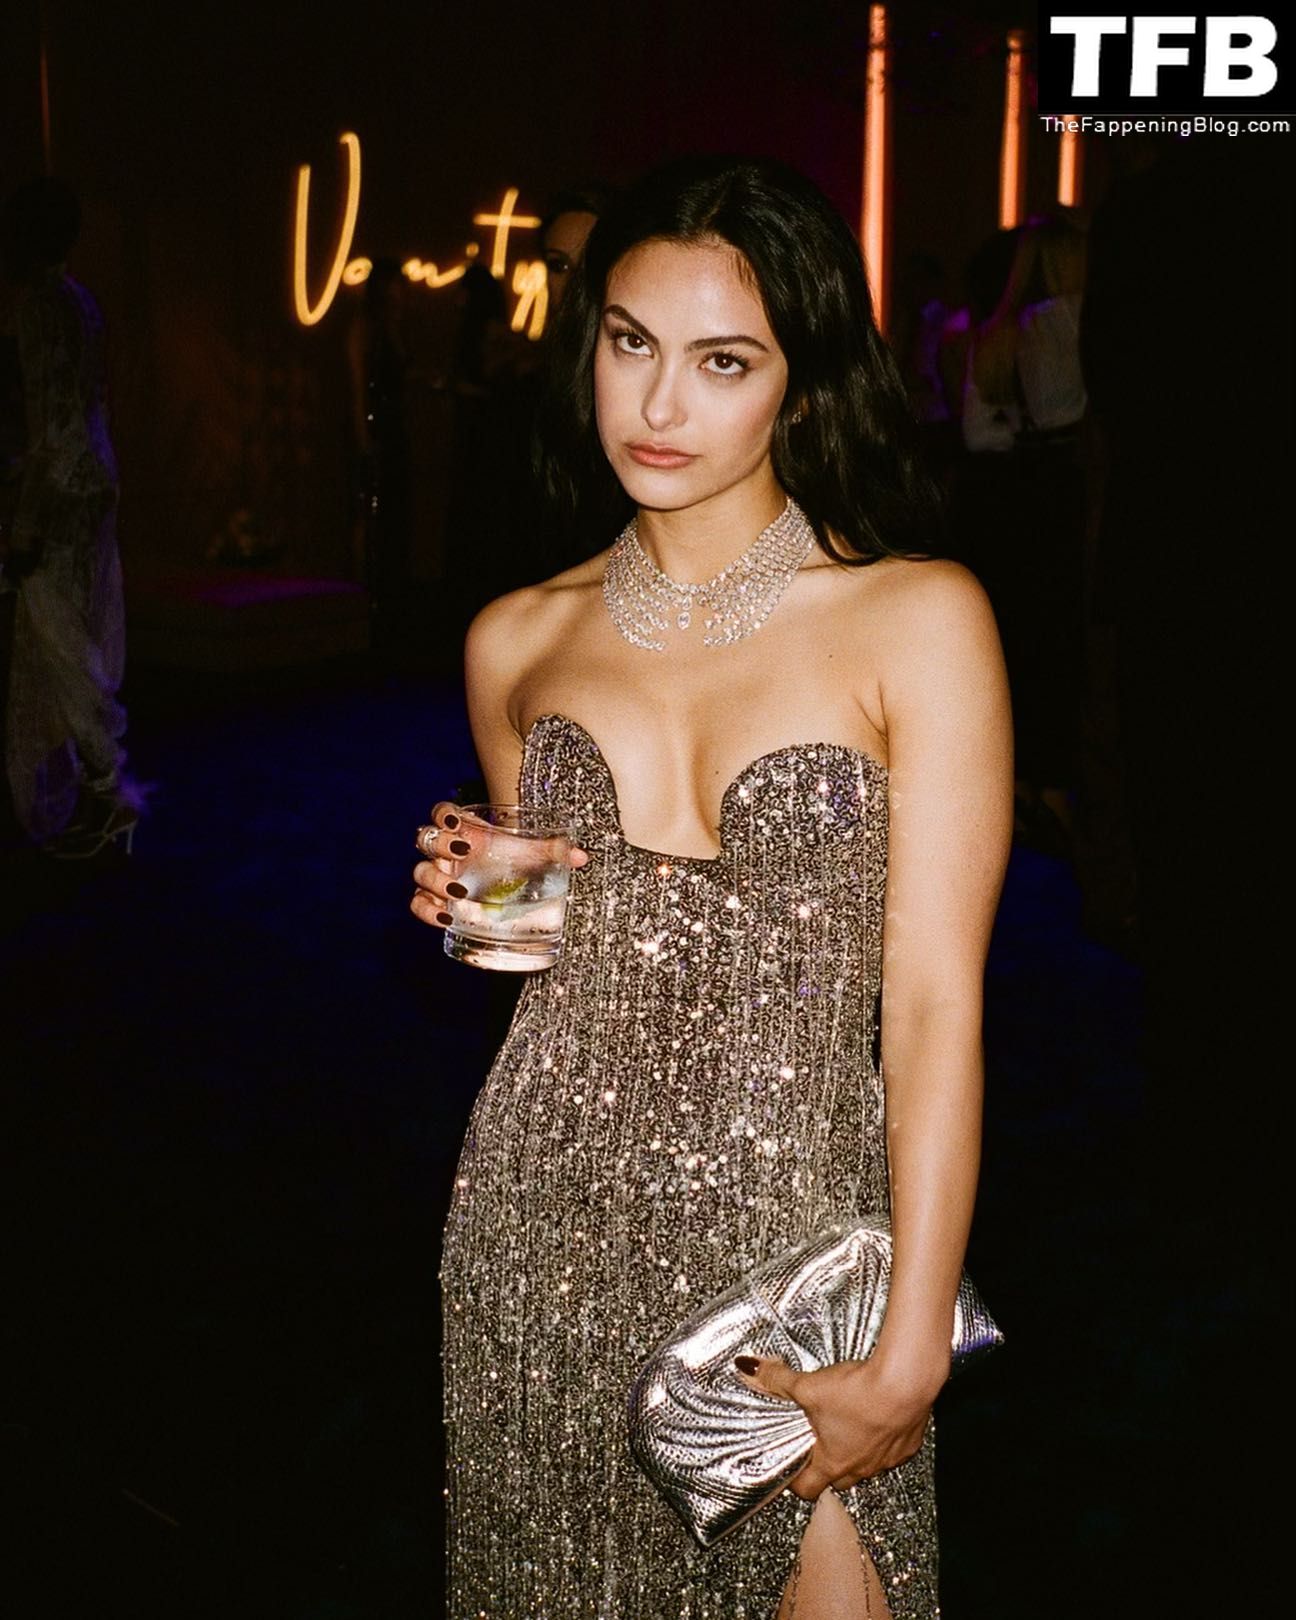 Camila-Mendes-Sexy-The-Fappening-Blog-16.jpg